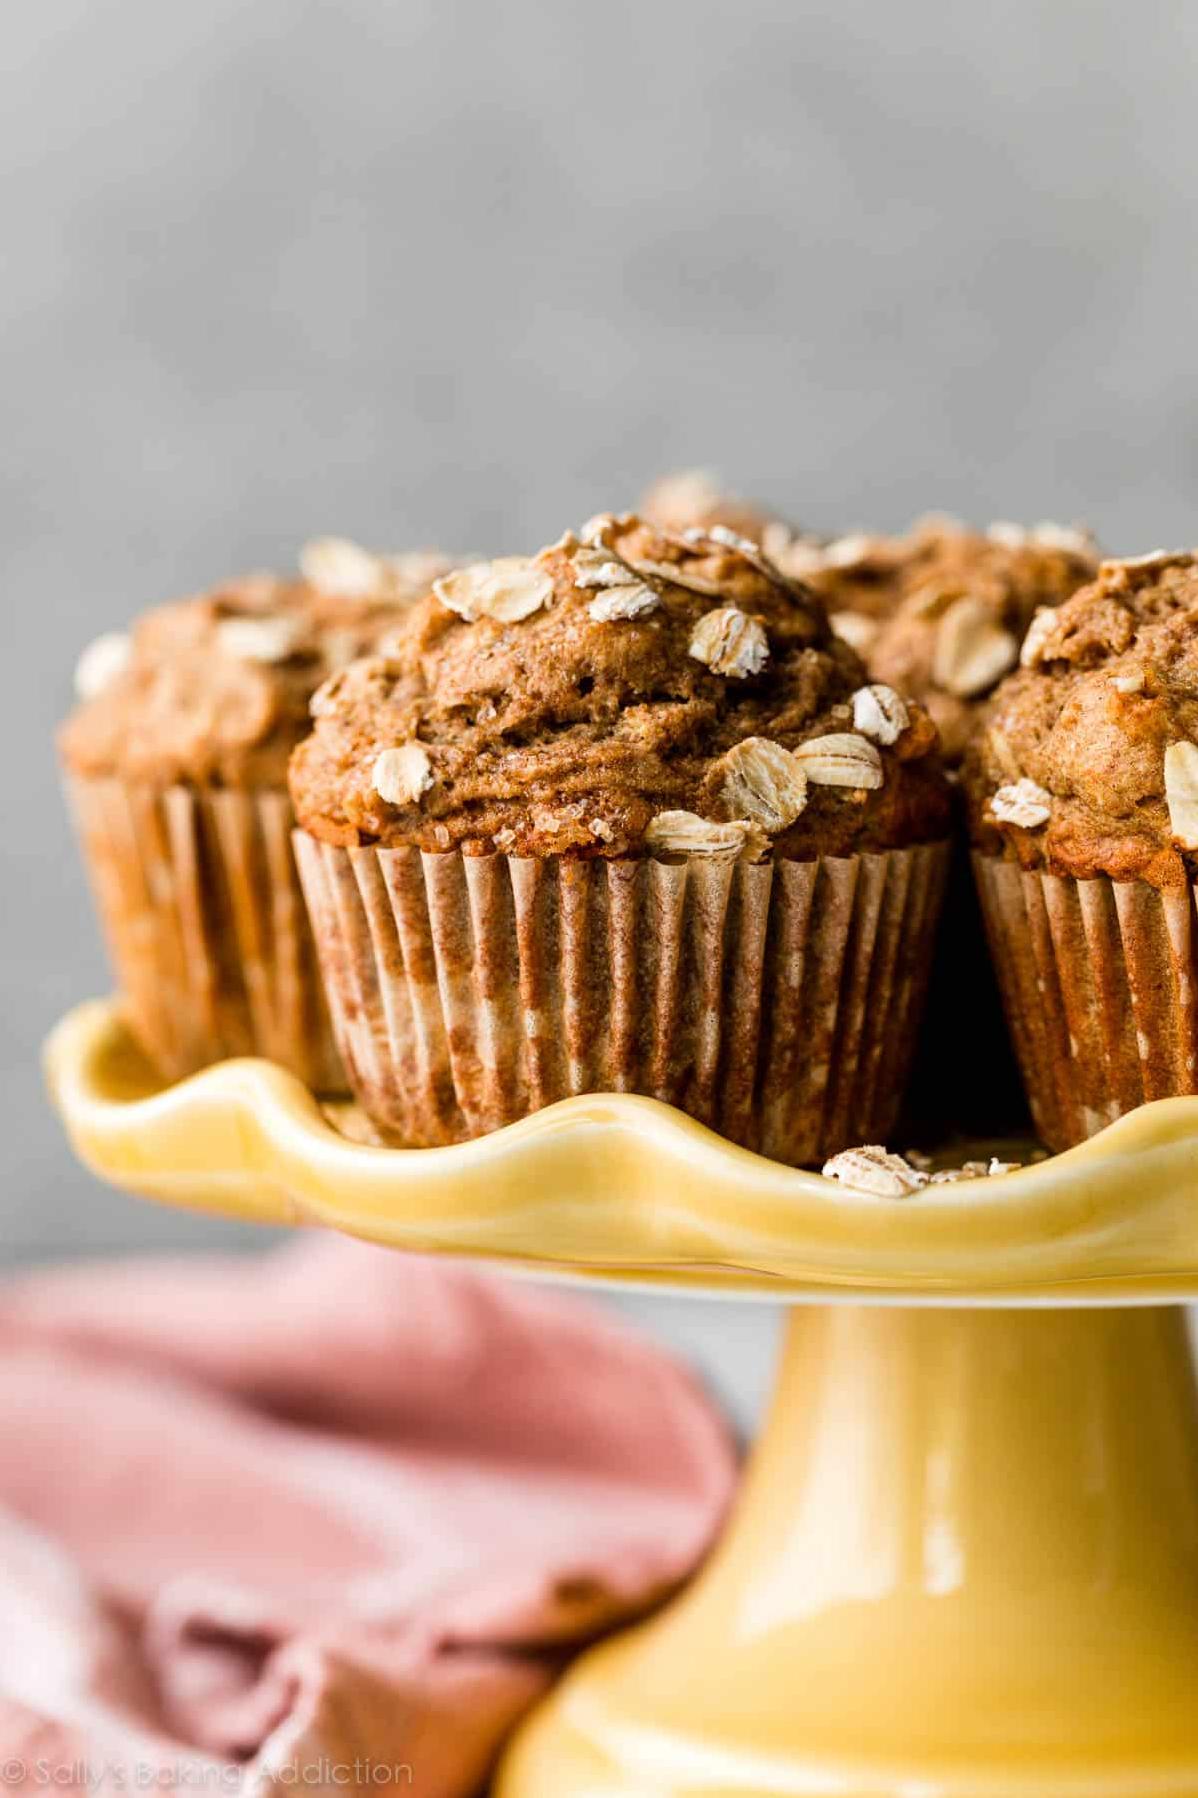  Who needs butter when you’ve got soft, moist, and delicious muffins like these?